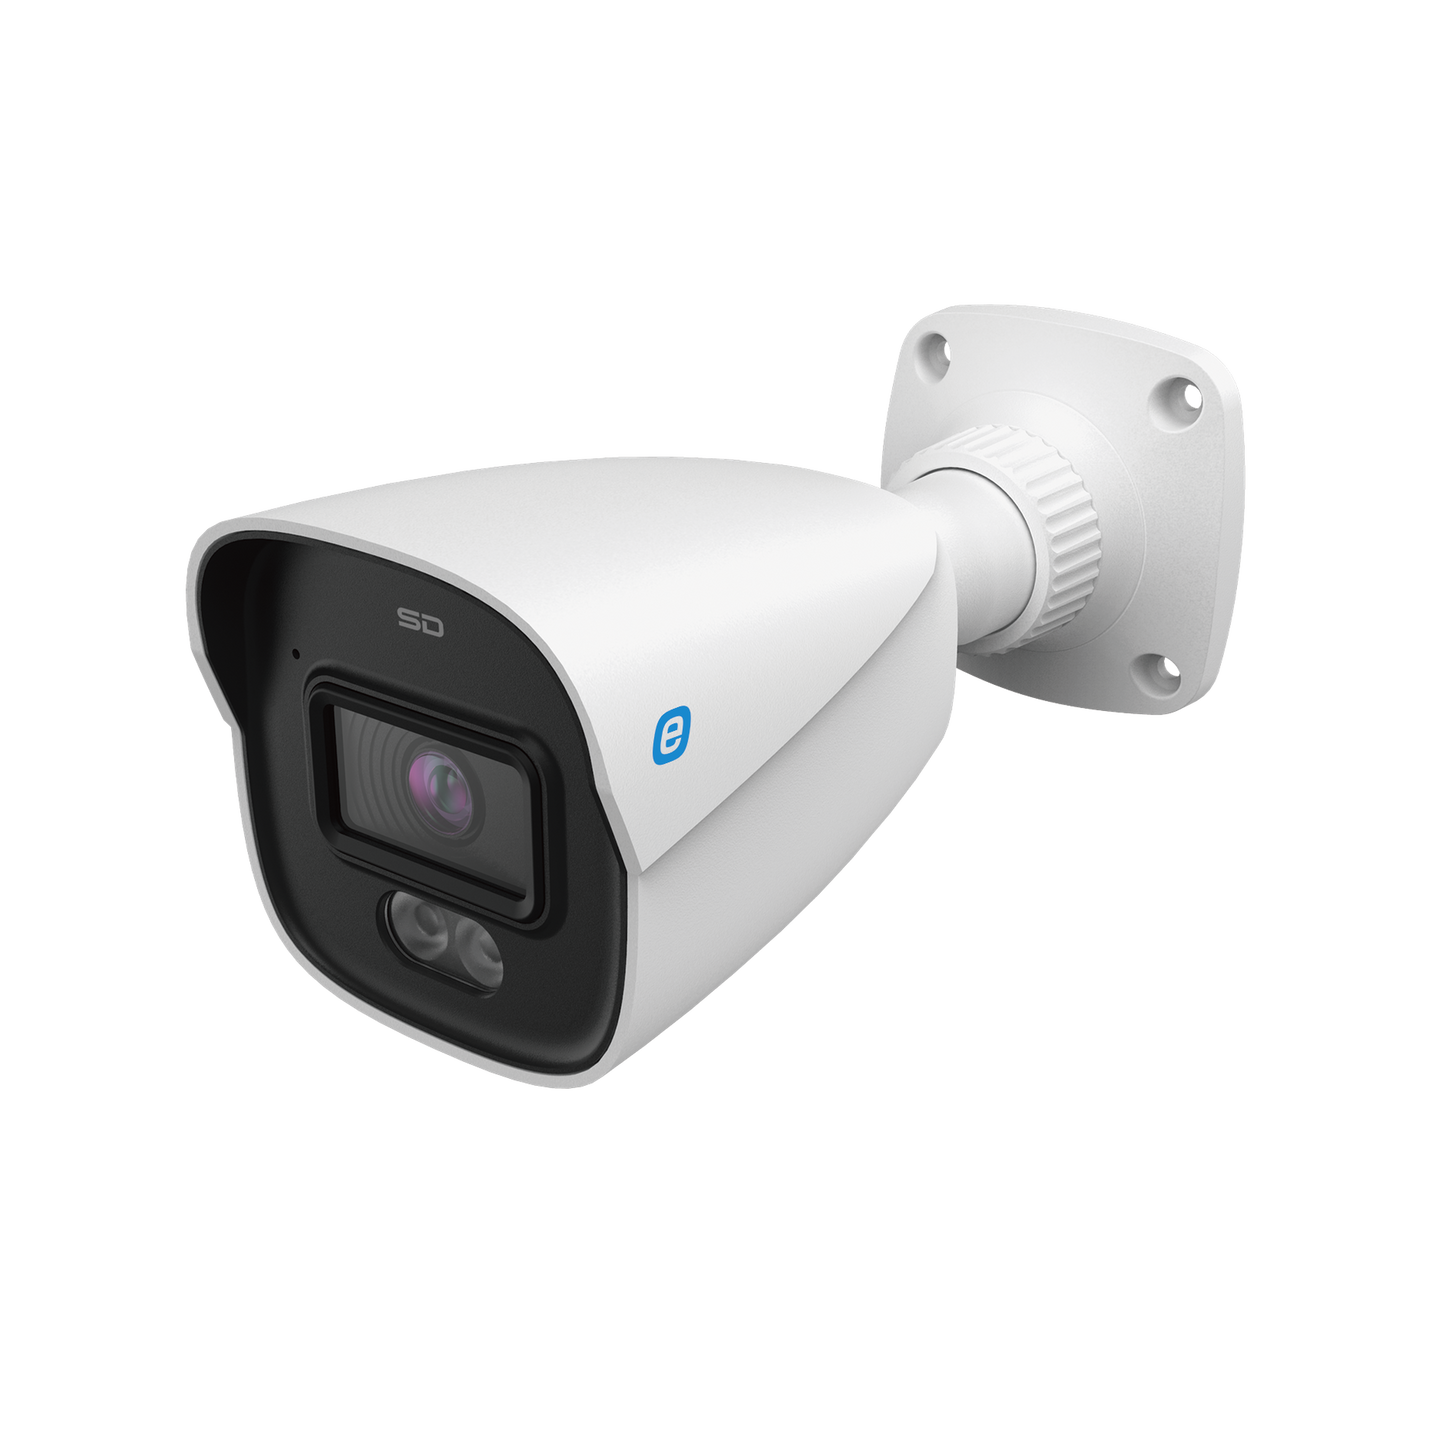 Bullet IP 4 MP / 24/7 Color Image / POE / White Light 98ft (30m) / WDR / Micro SD / IP67 / 2.8 mm Lens / Built-In Microphone / Cloud Video Recording / Metal Housing